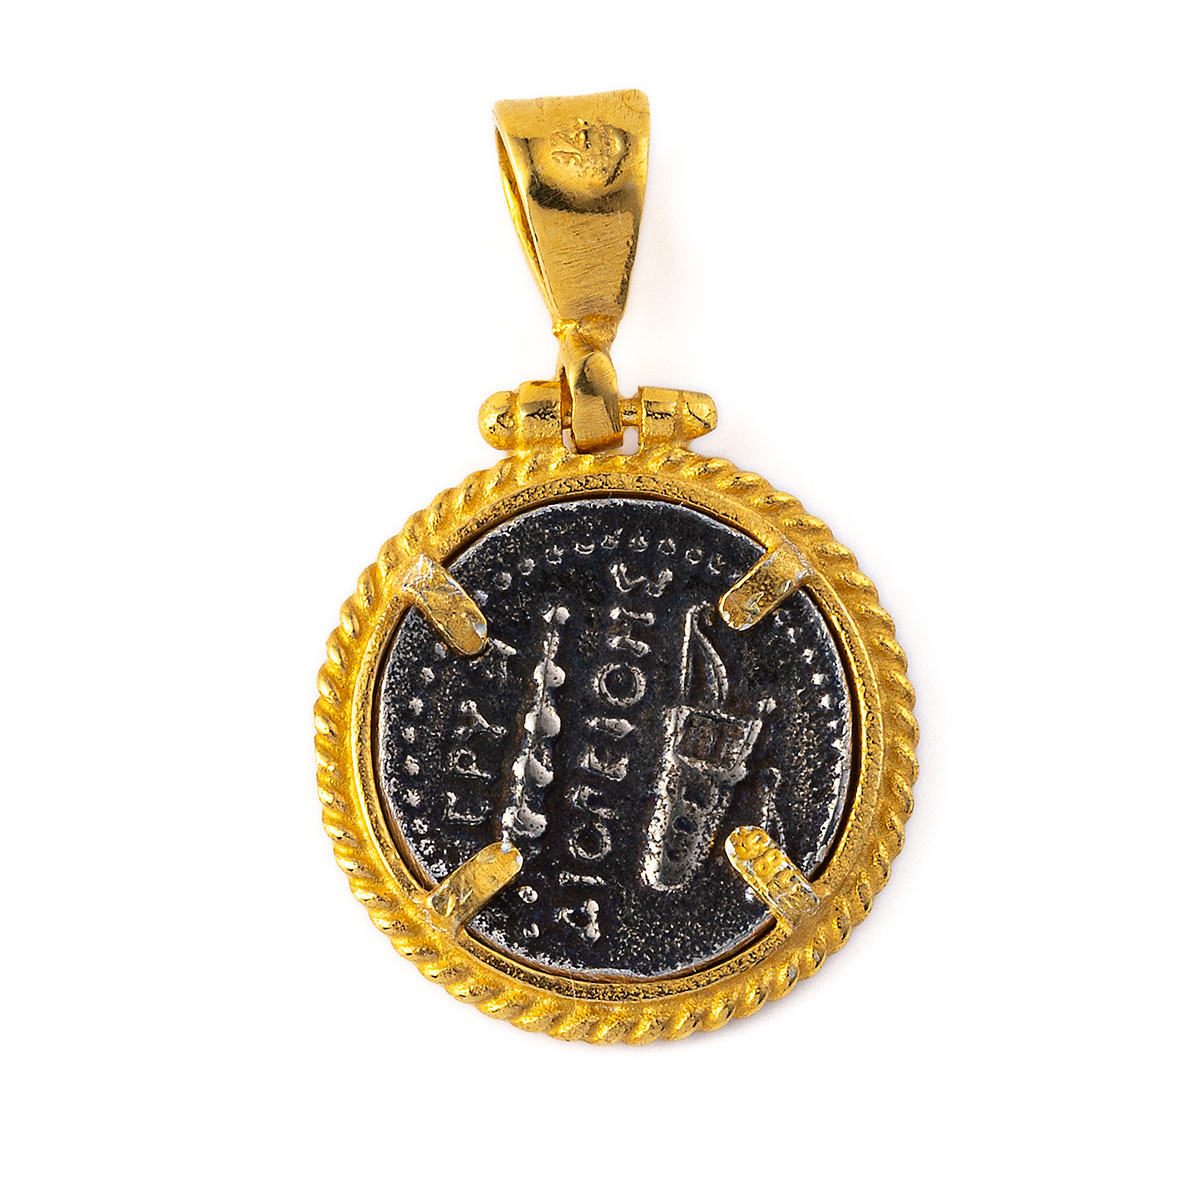 Hercules Pendant - 925 Sterling Silver Gold Plated - GREEK ROOTS